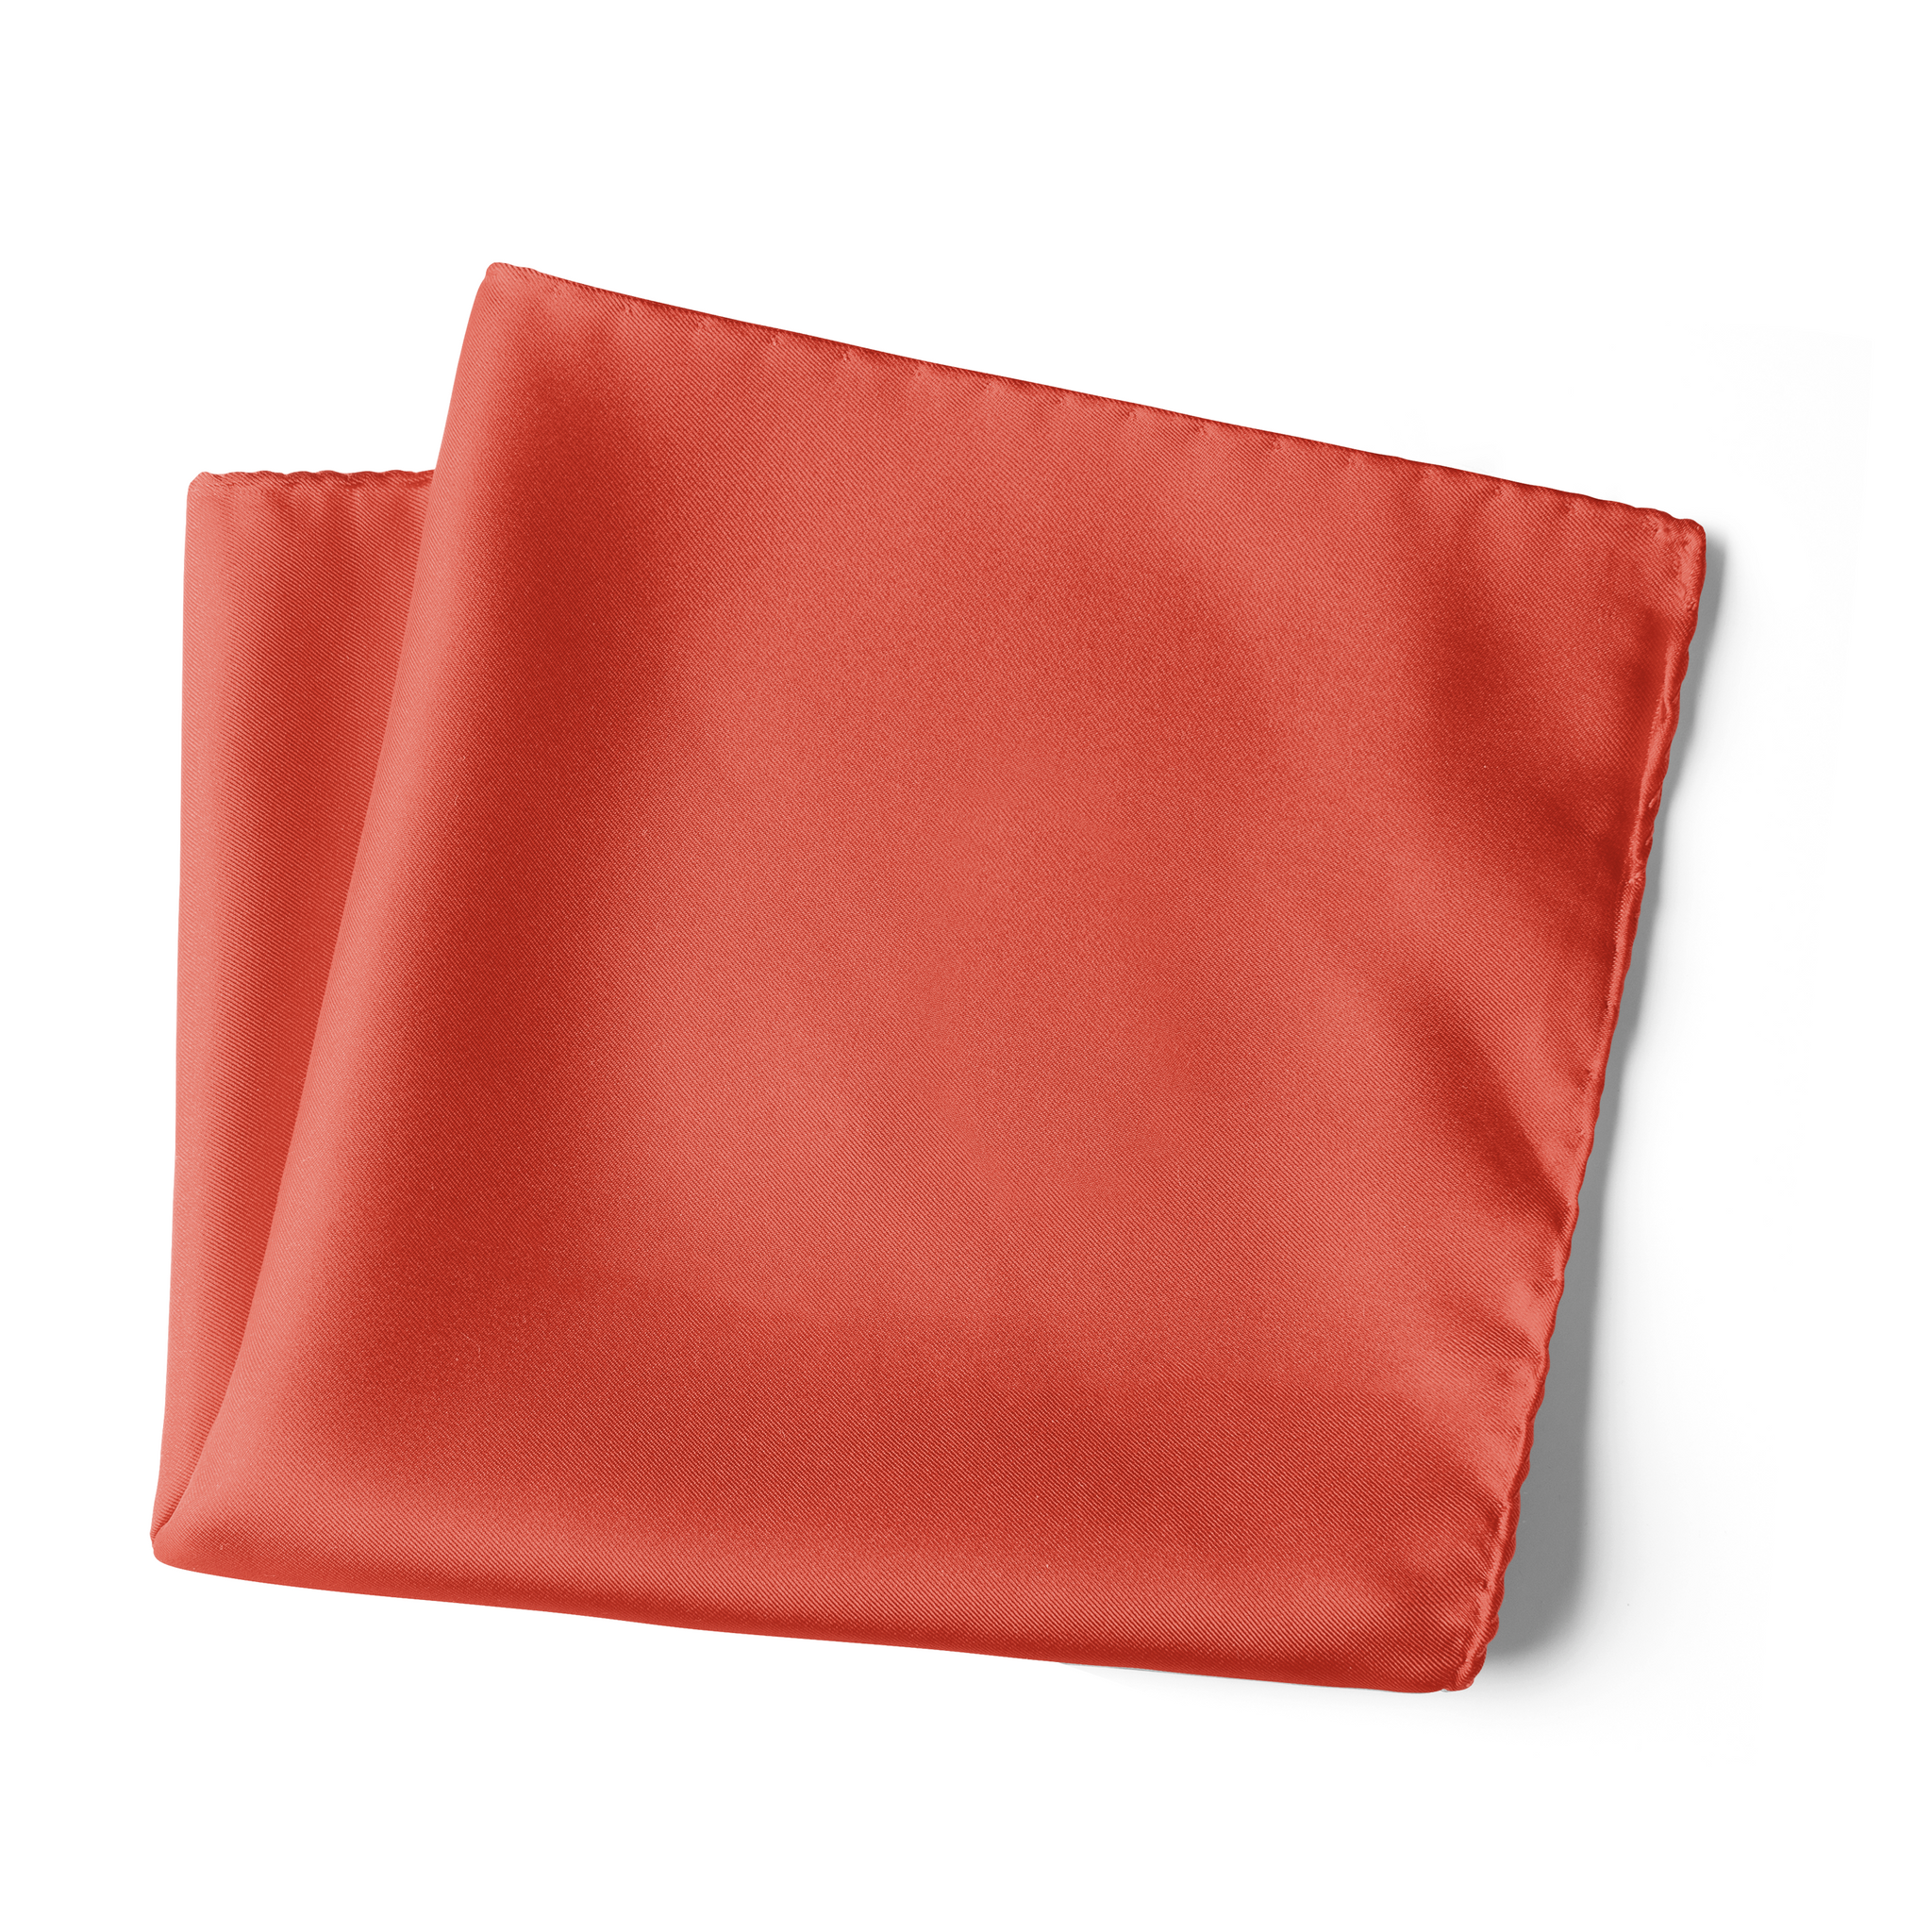 Chokore Coral Pure Silk Pocket Square, from the Solids Line